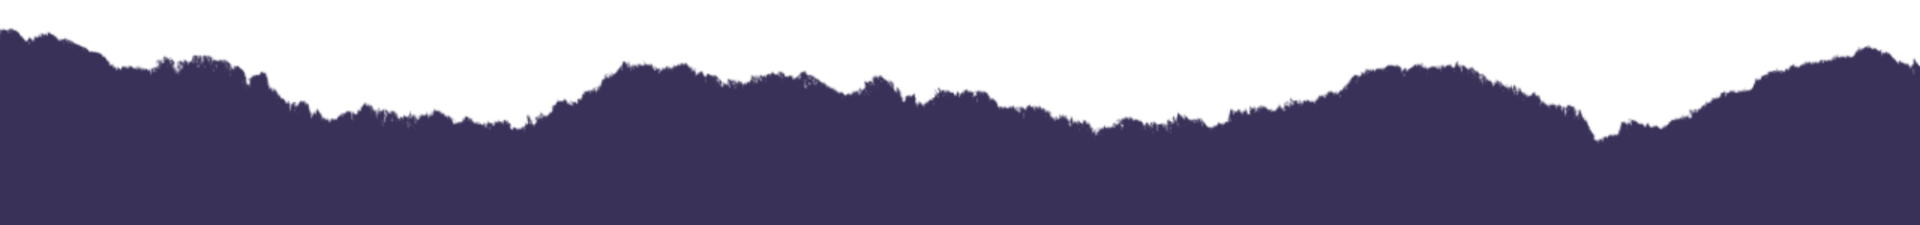 A black and purple background with a mountain in the middle.